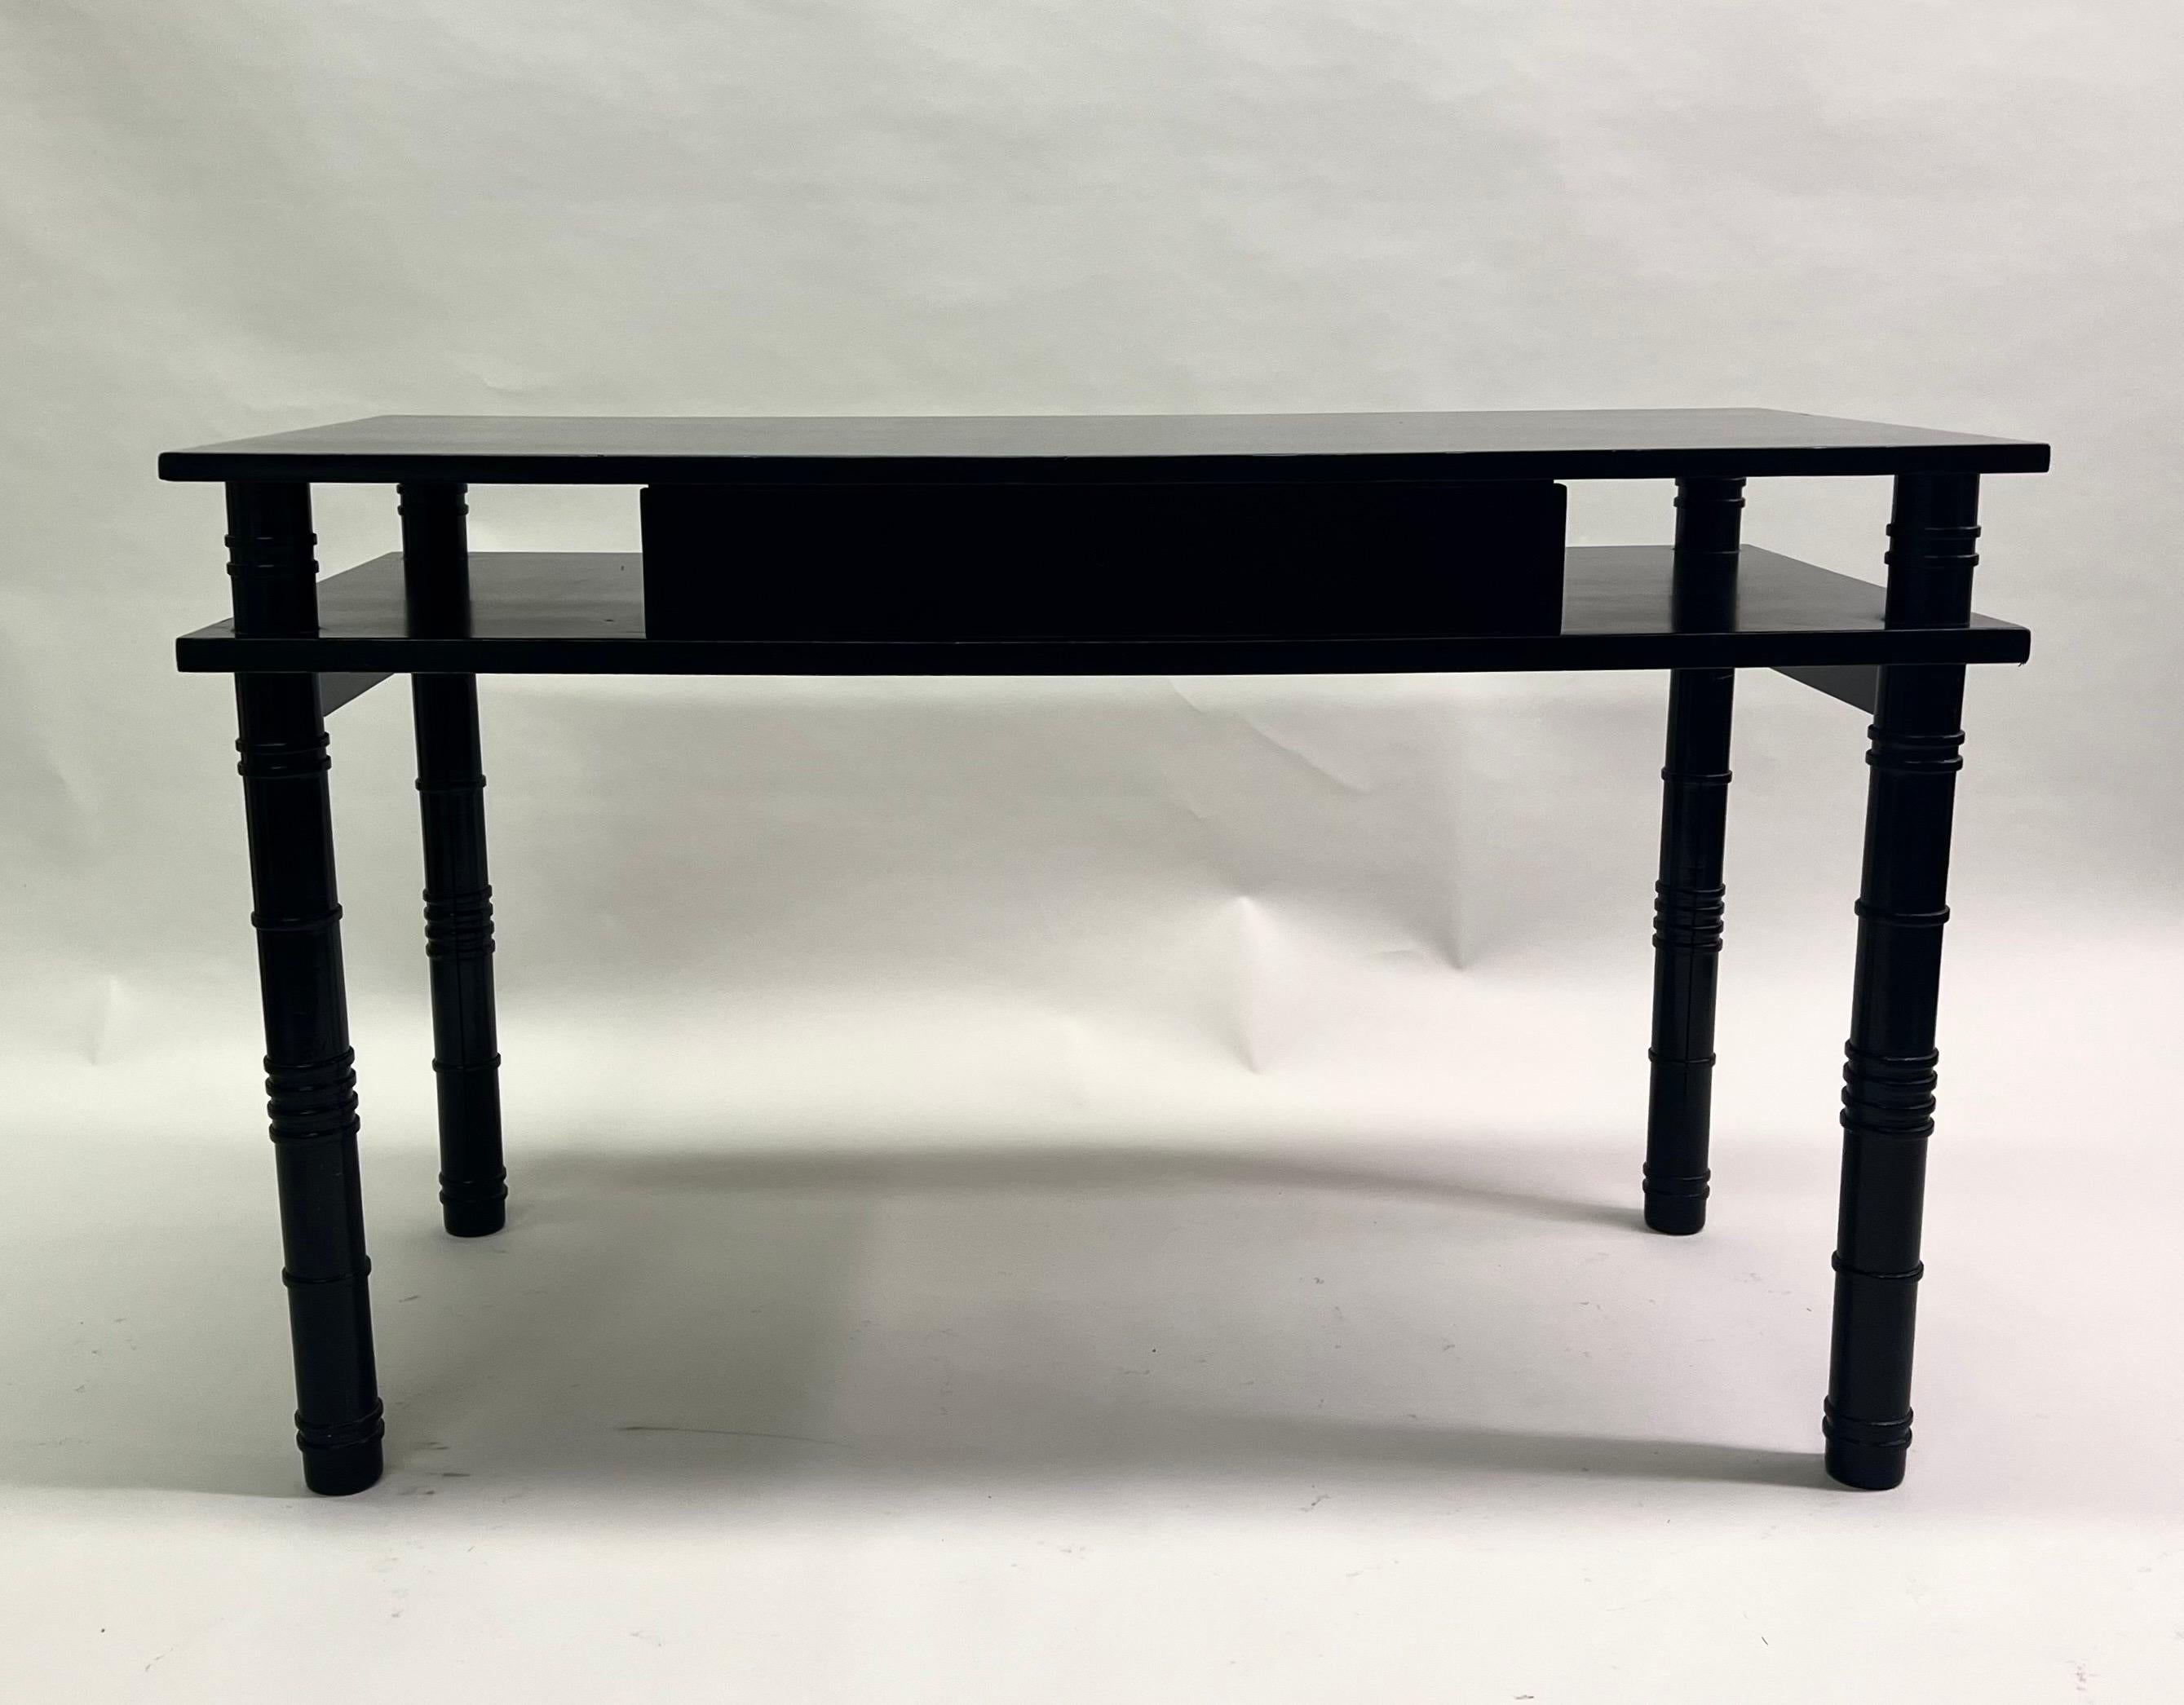 Important Late French Art Deco / Mid-Century Modern Neoclassical double level writing table / desk in Ebonized solid Sycamore by Leon Jallot, 1936. This rare, early modern piece was constructed to allow transparency, open-ness and light to play an